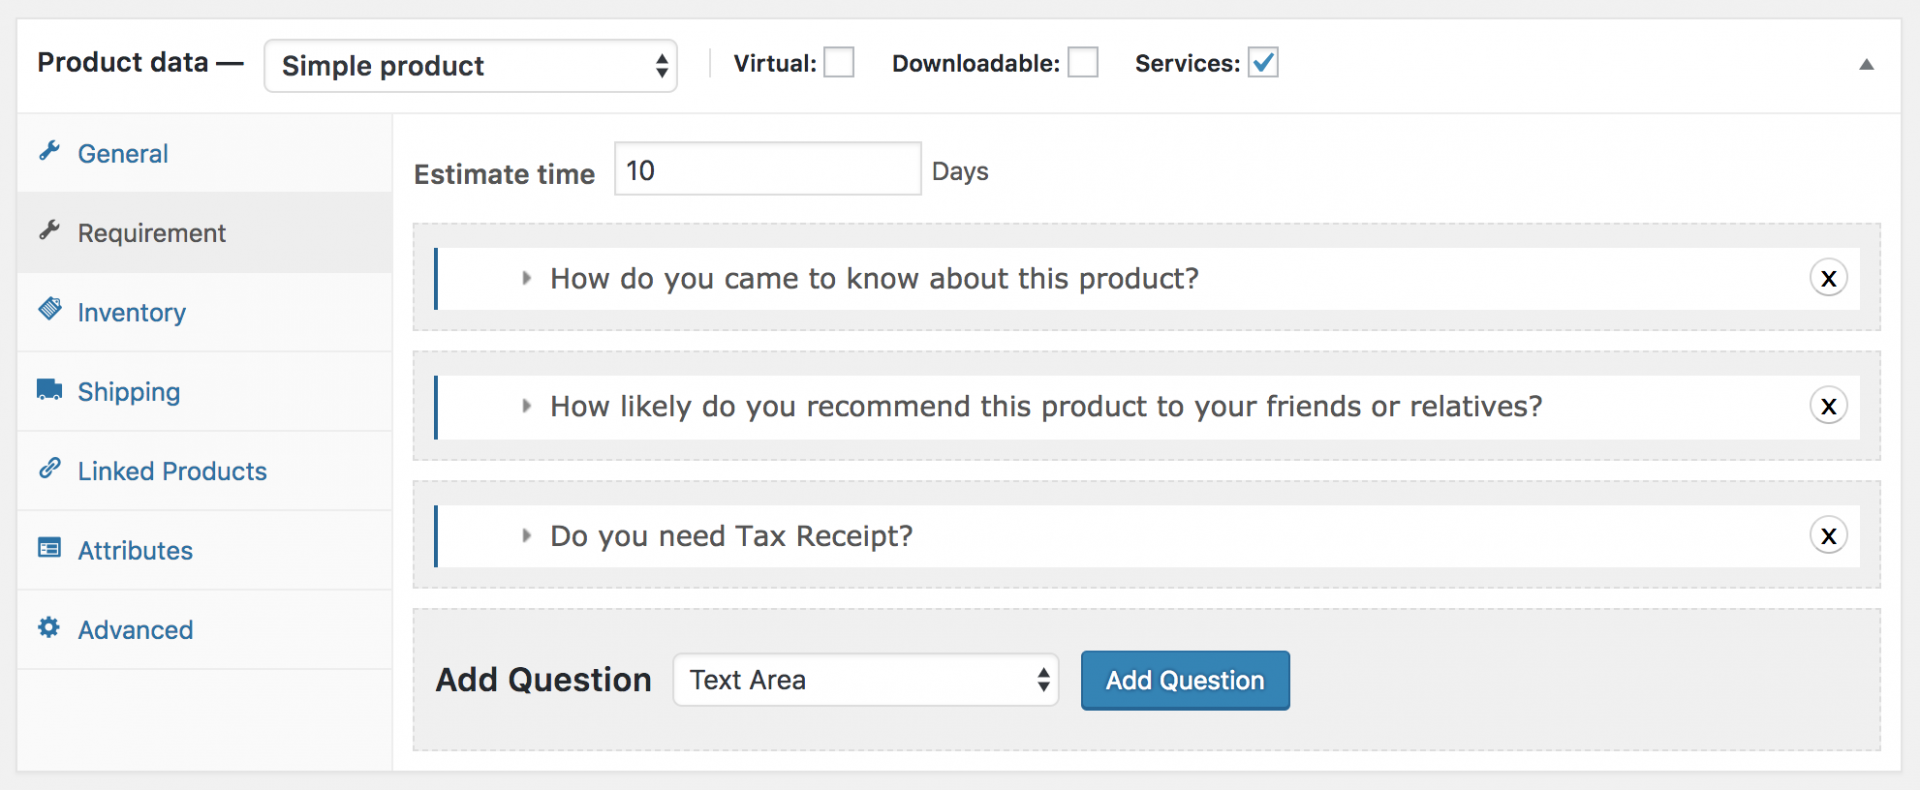 More Clean option to set your product as services